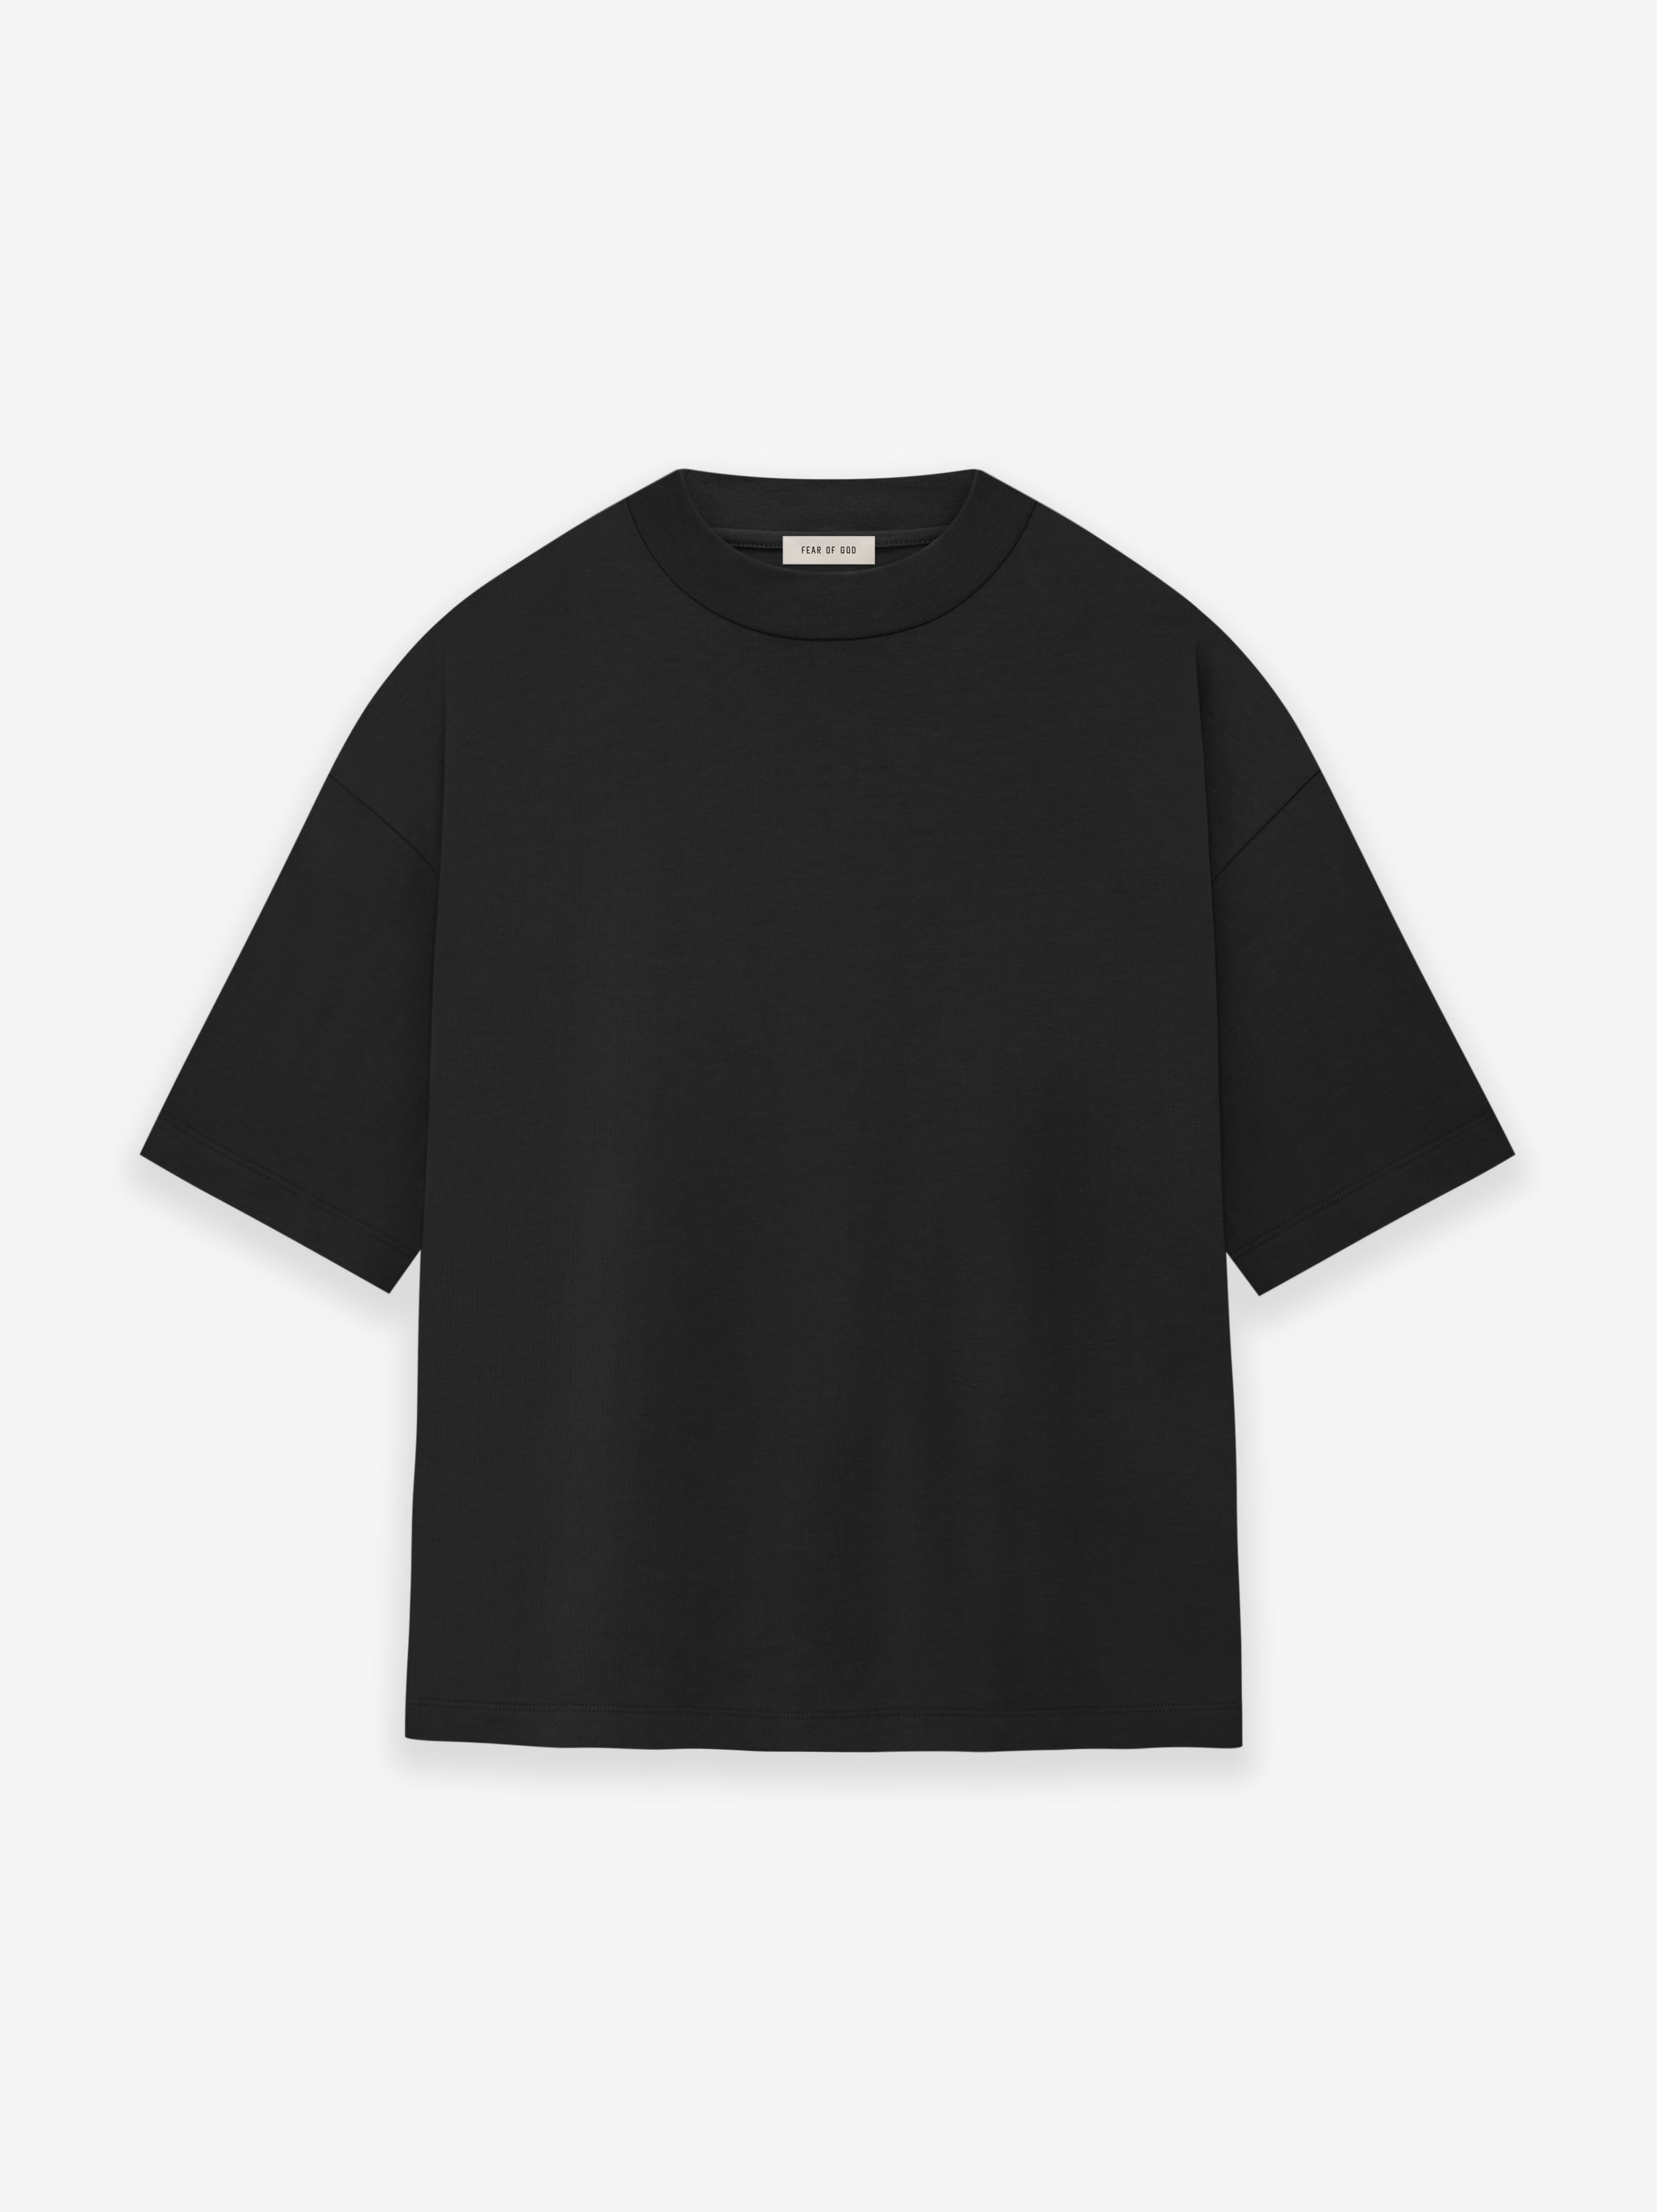 M FEAR OF GOD inside out インサイド アウト Tシャツ - Tシャツ ...